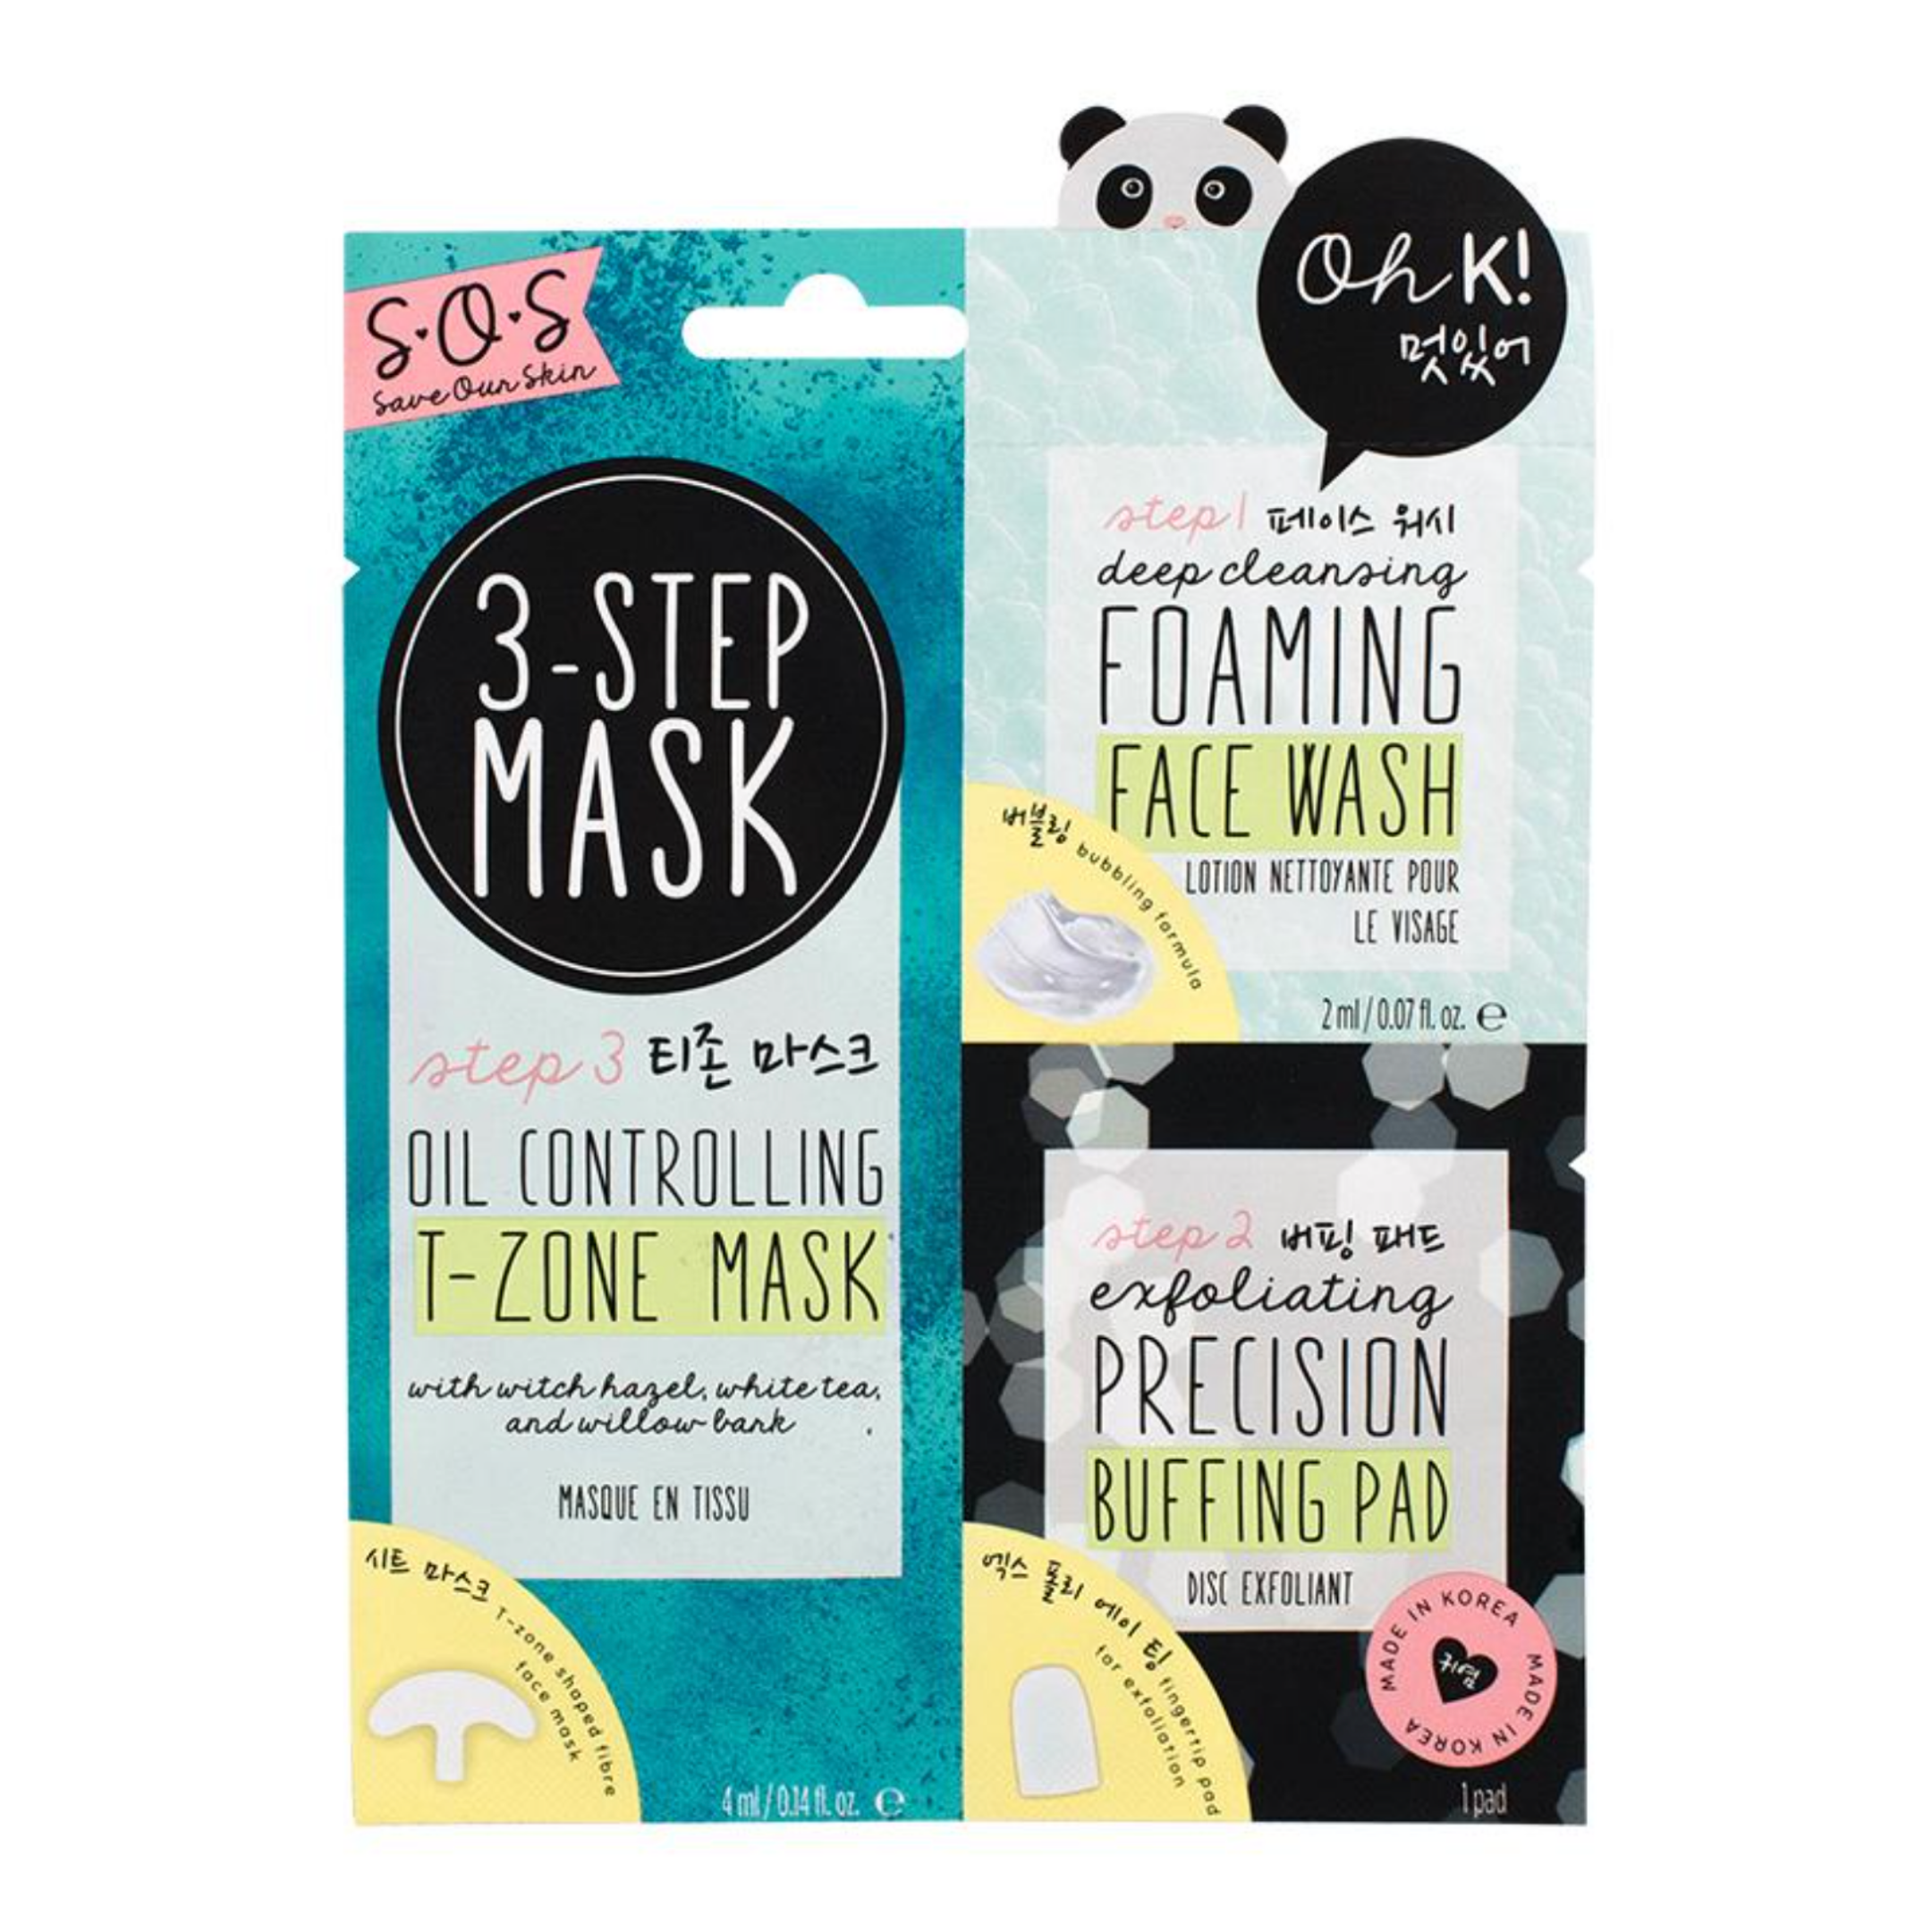 Oh K! SOS 3-Step T-Zone Mask